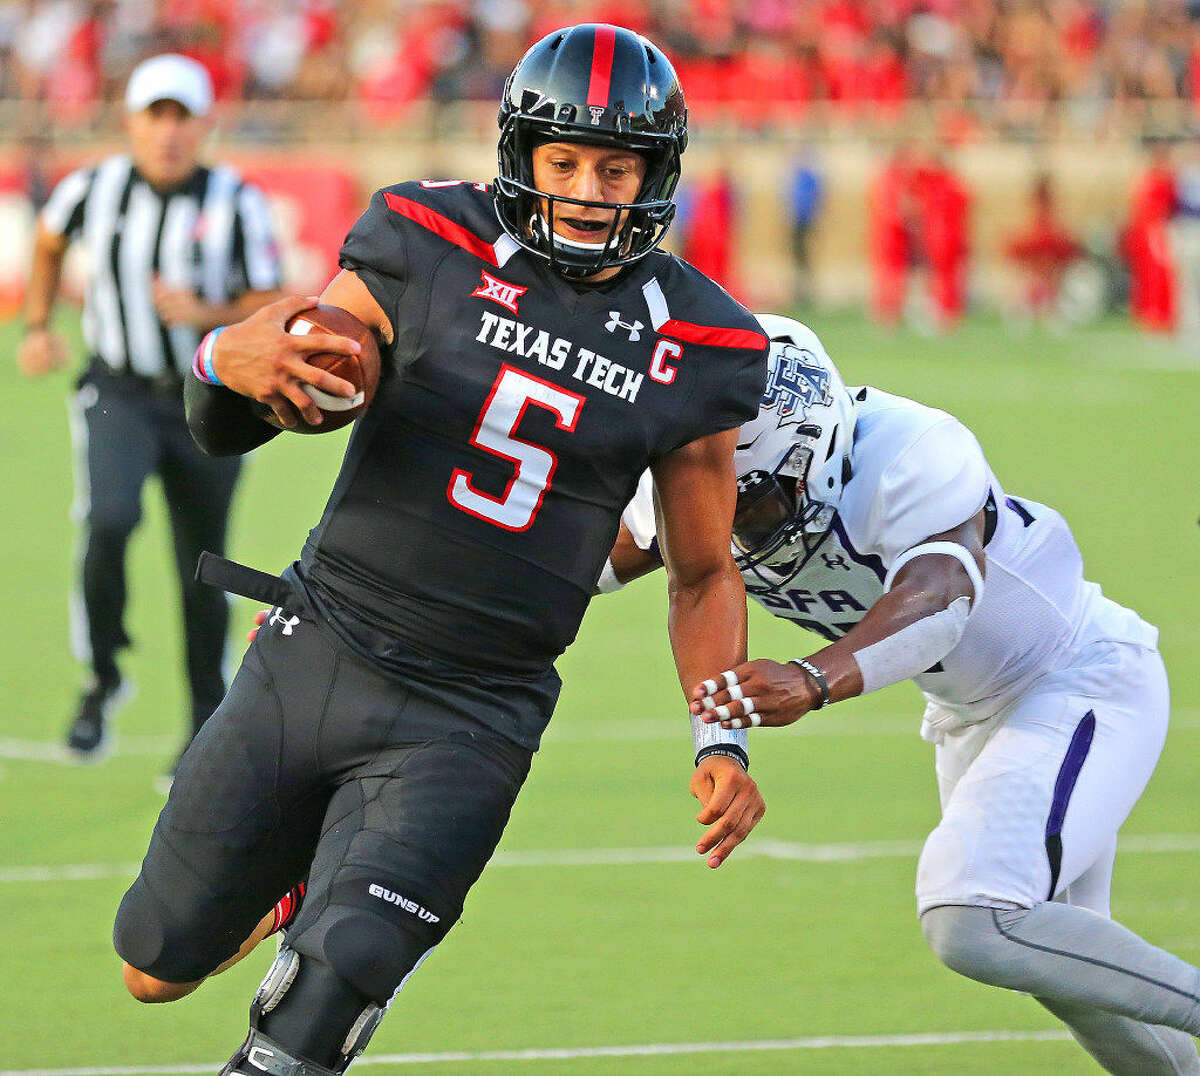   Texas Tech quarterback Patrick Mahomes II scampers into the end zone for a Red Raider score against Stephen F. Austin, Saturday, Sept. 3 at Jones AT&T Stadium.